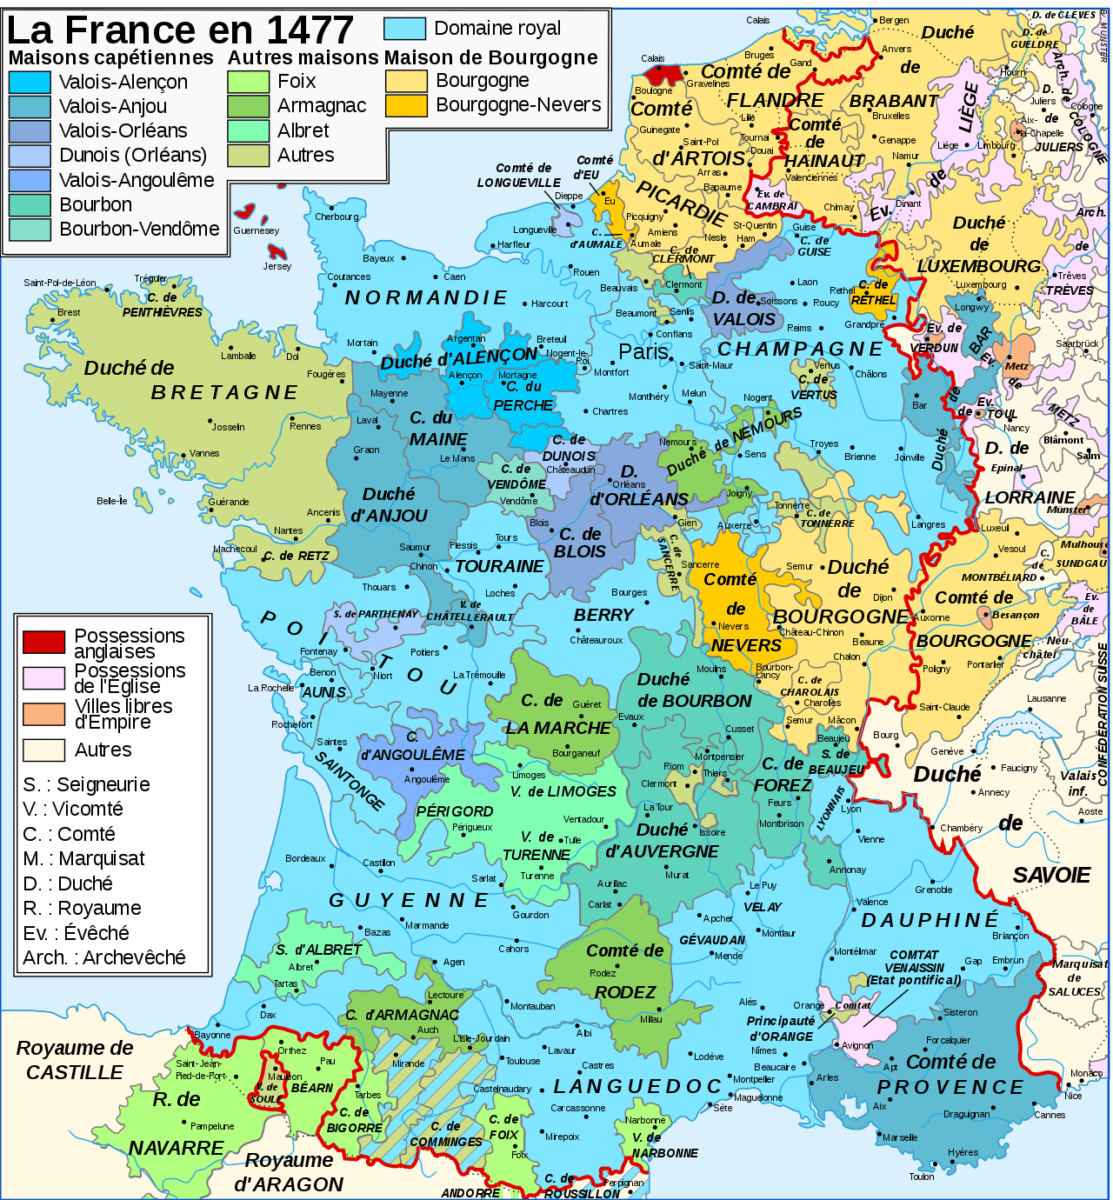 You are currently viewing Le royaume de France en 1477